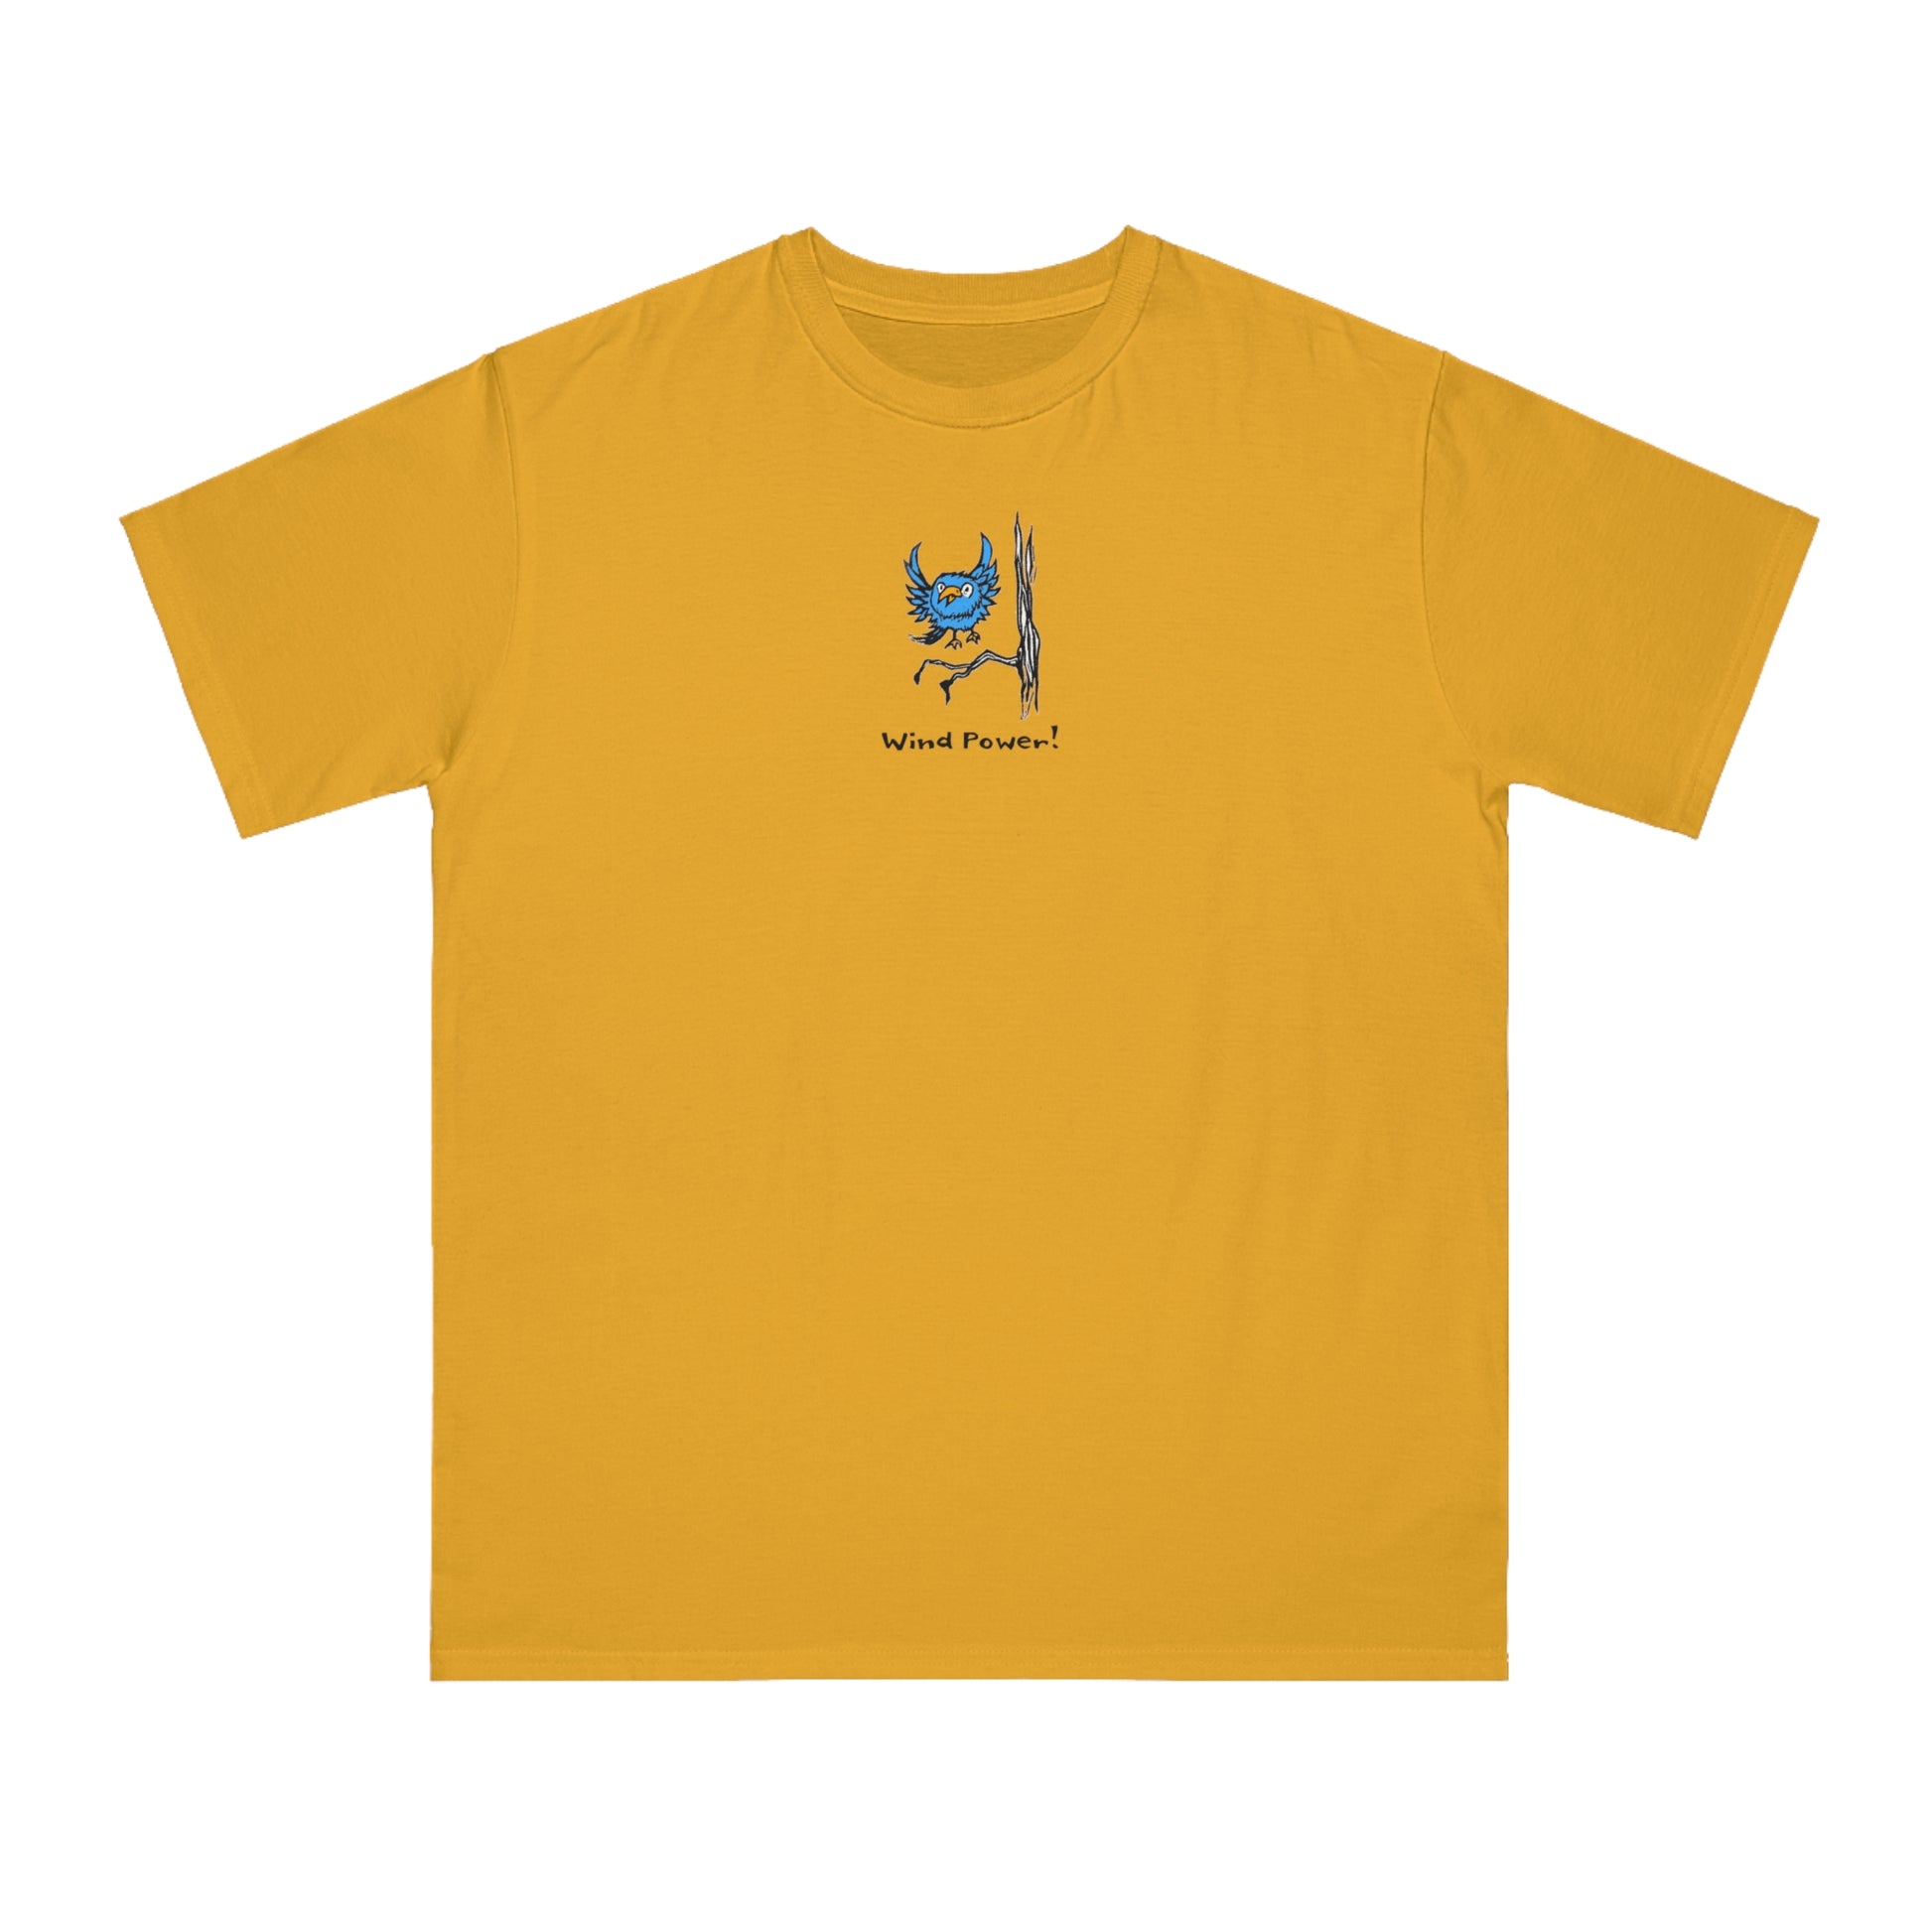 Blue bird with orange beak flying over branch on tree on beehive yellow color unisex men's t-shirt. Text under it reads Wind Power